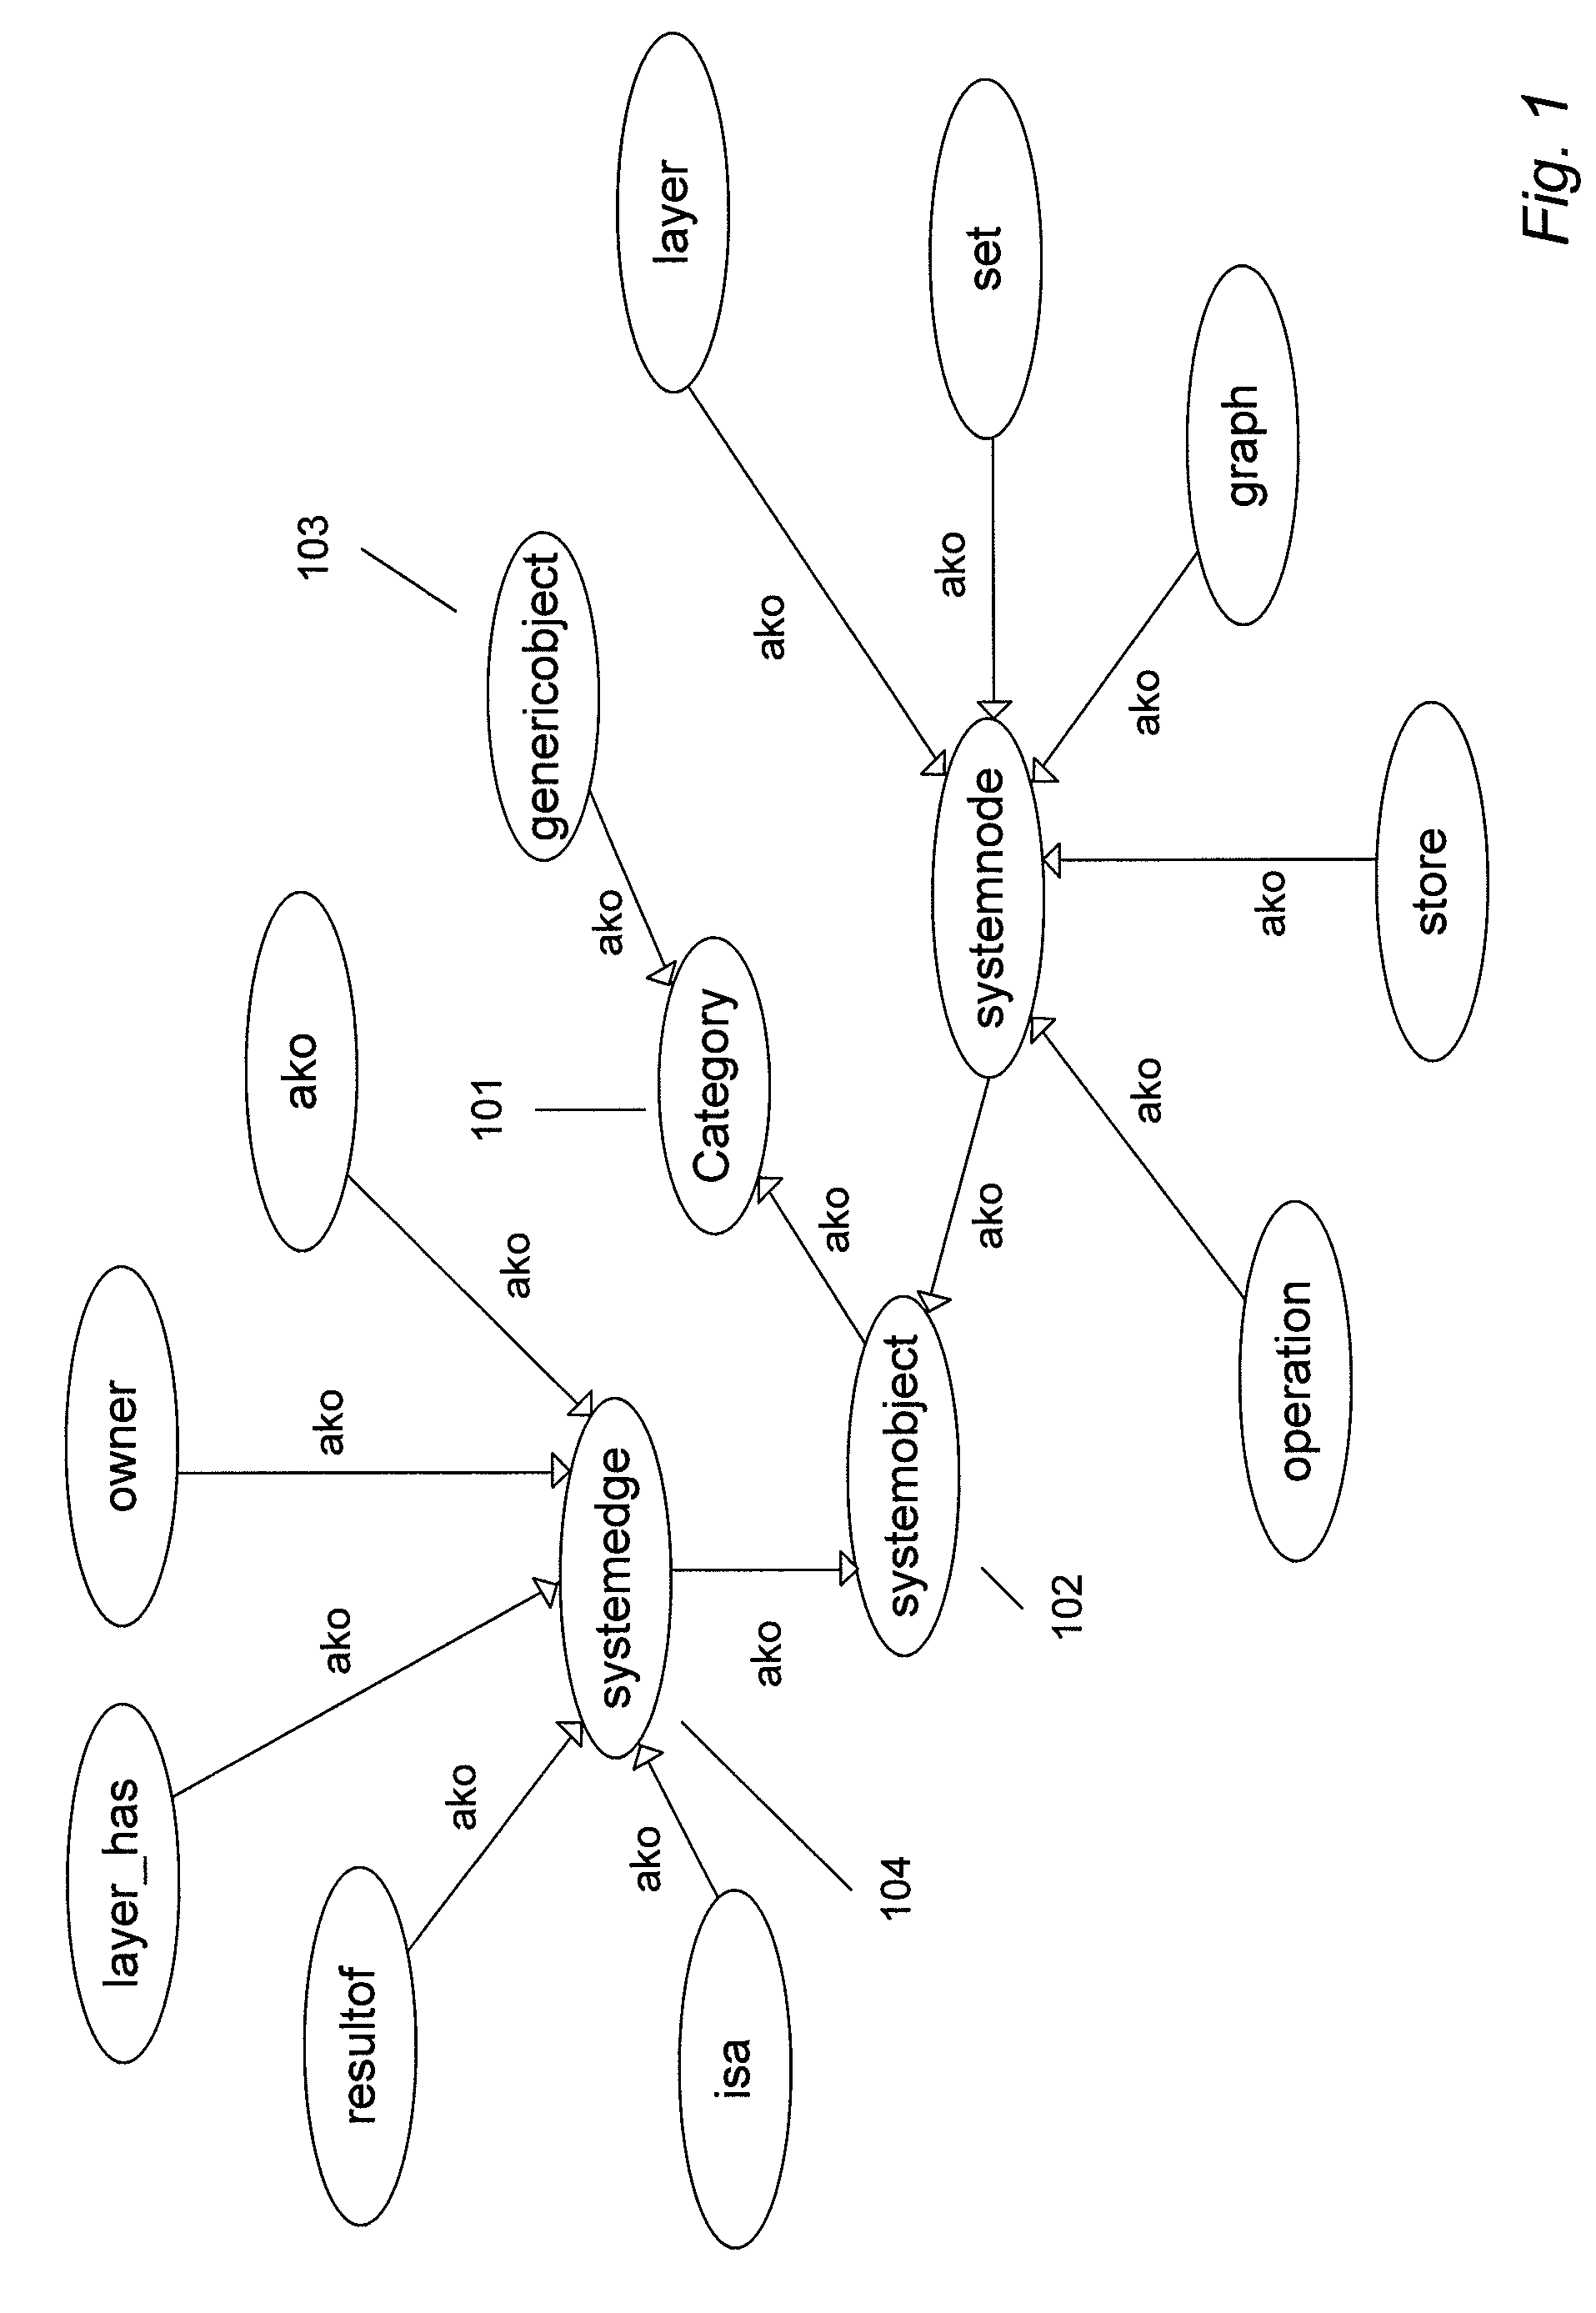 Graph database system and method for facilitating financial and corporate relationship analysis